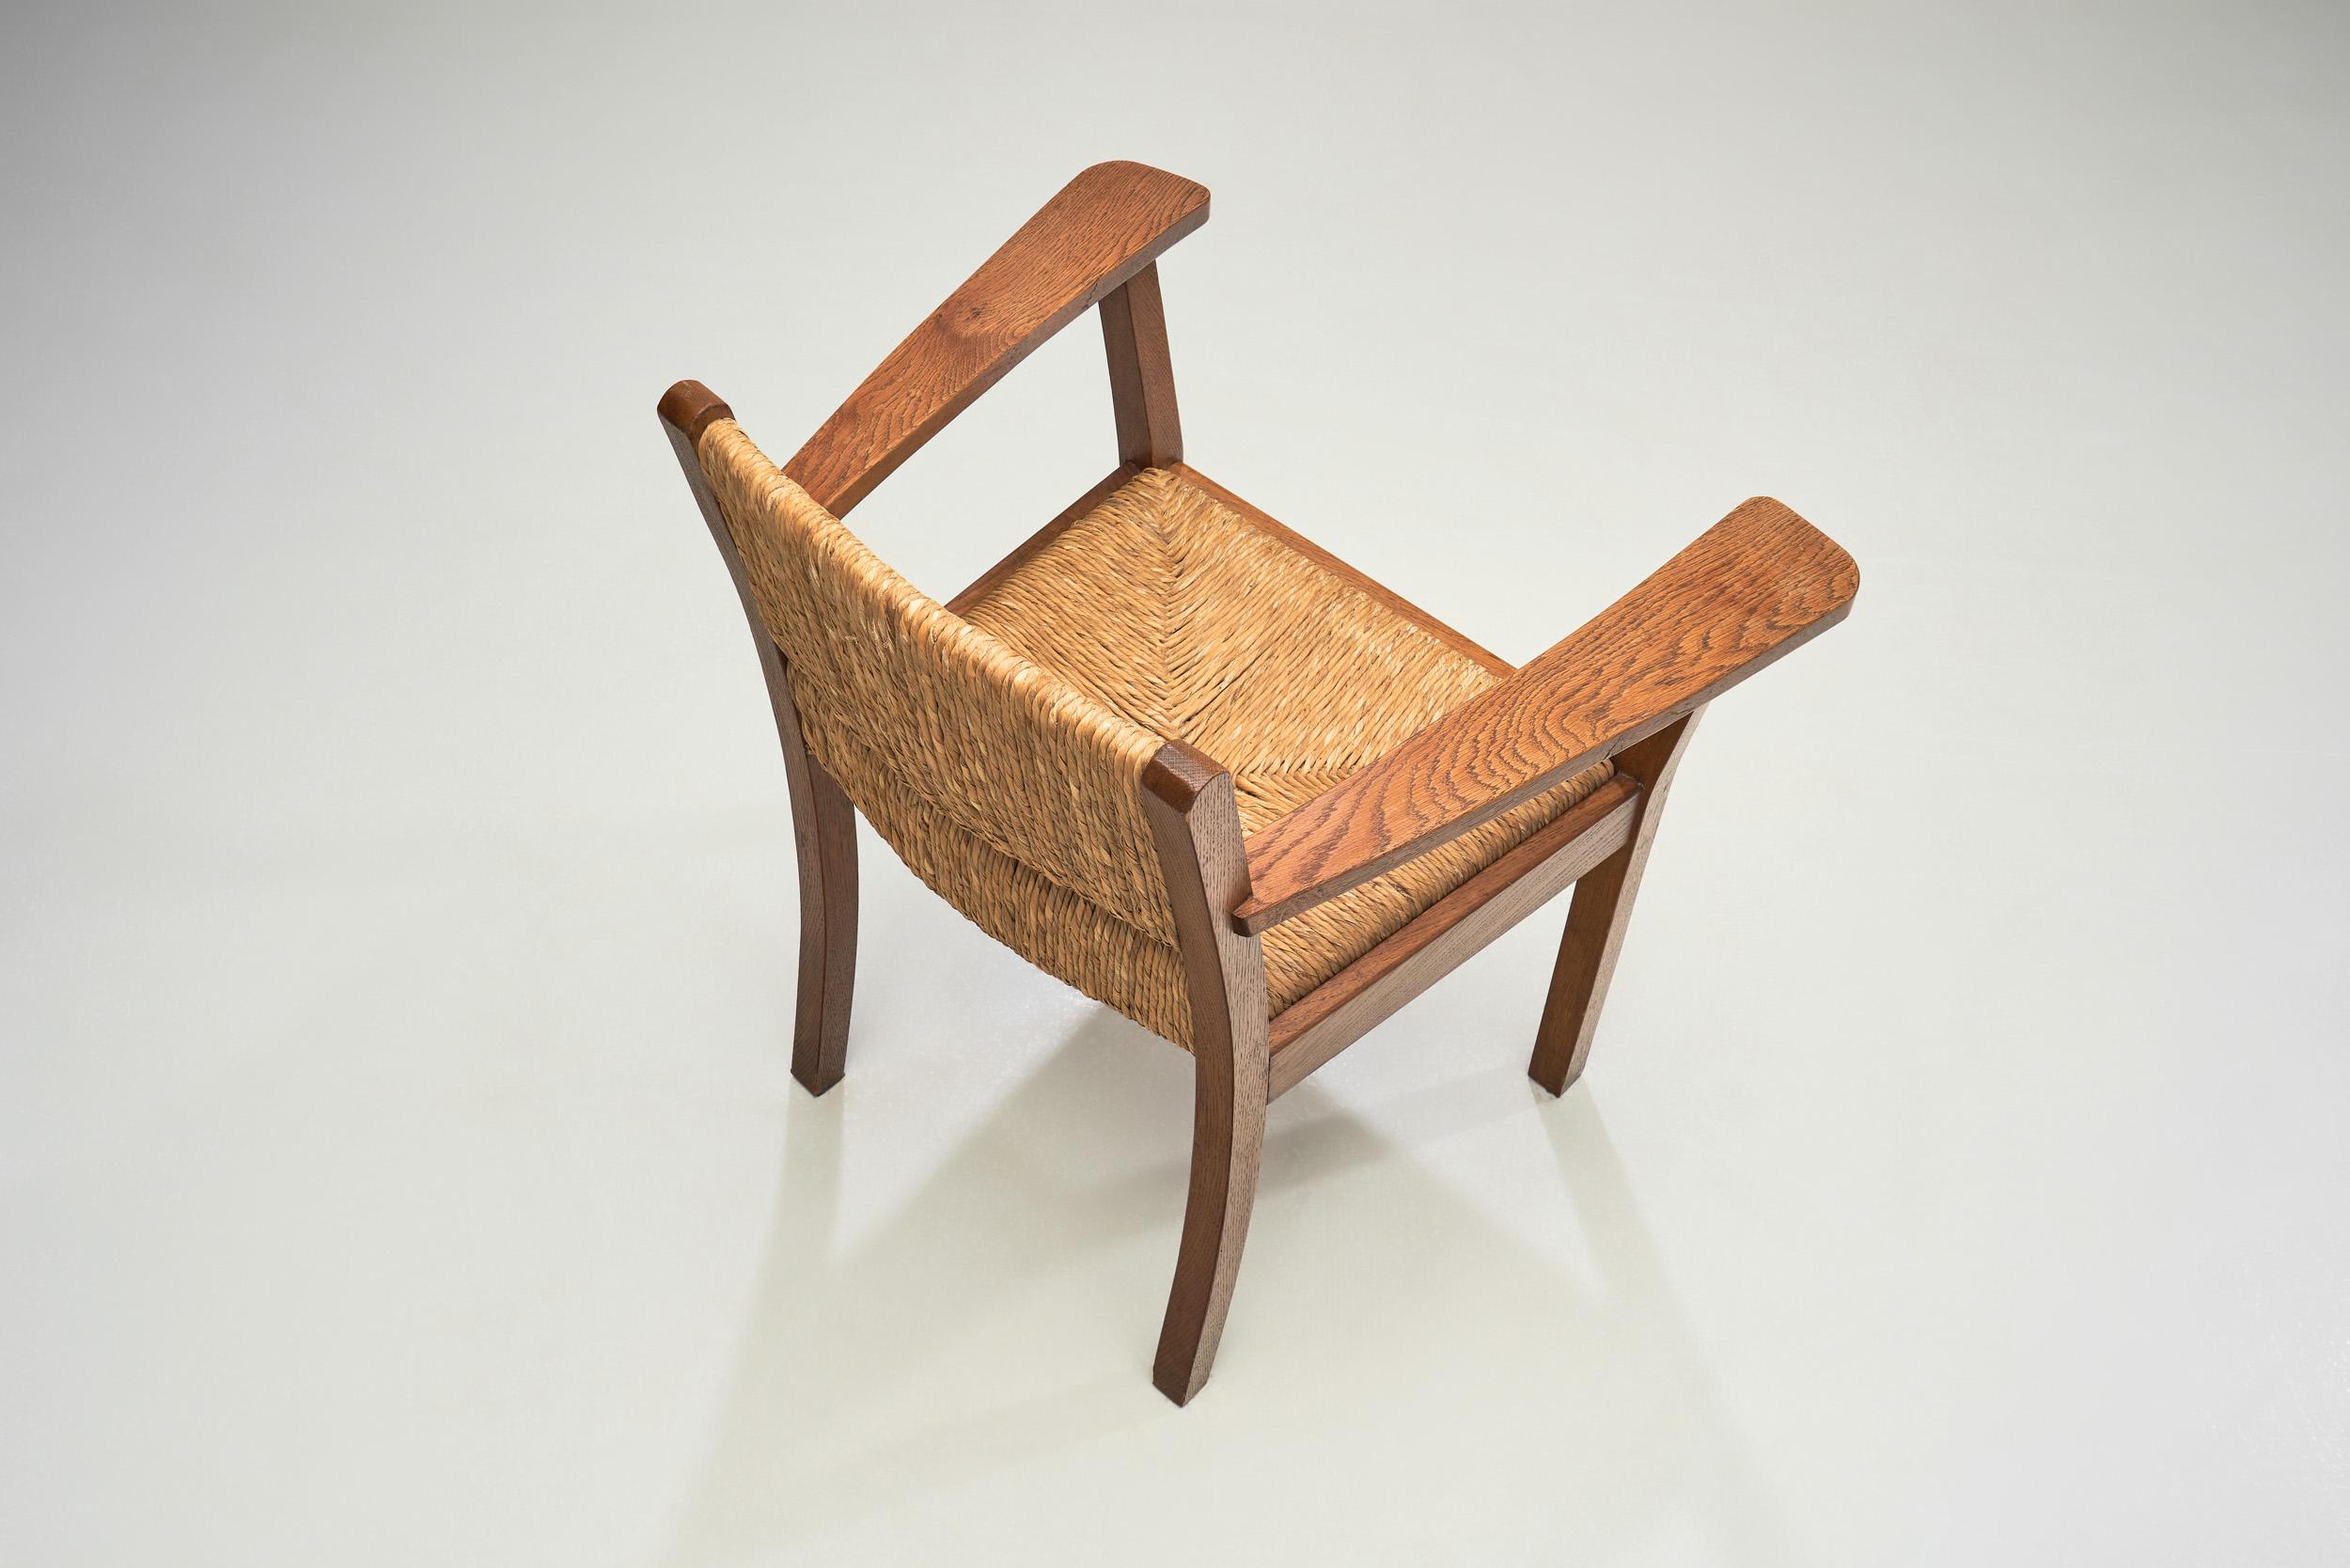 Rush Oak Worpsweder Armchair by Willi Ohler for Erich Schultz, Germany 1920s For Sale